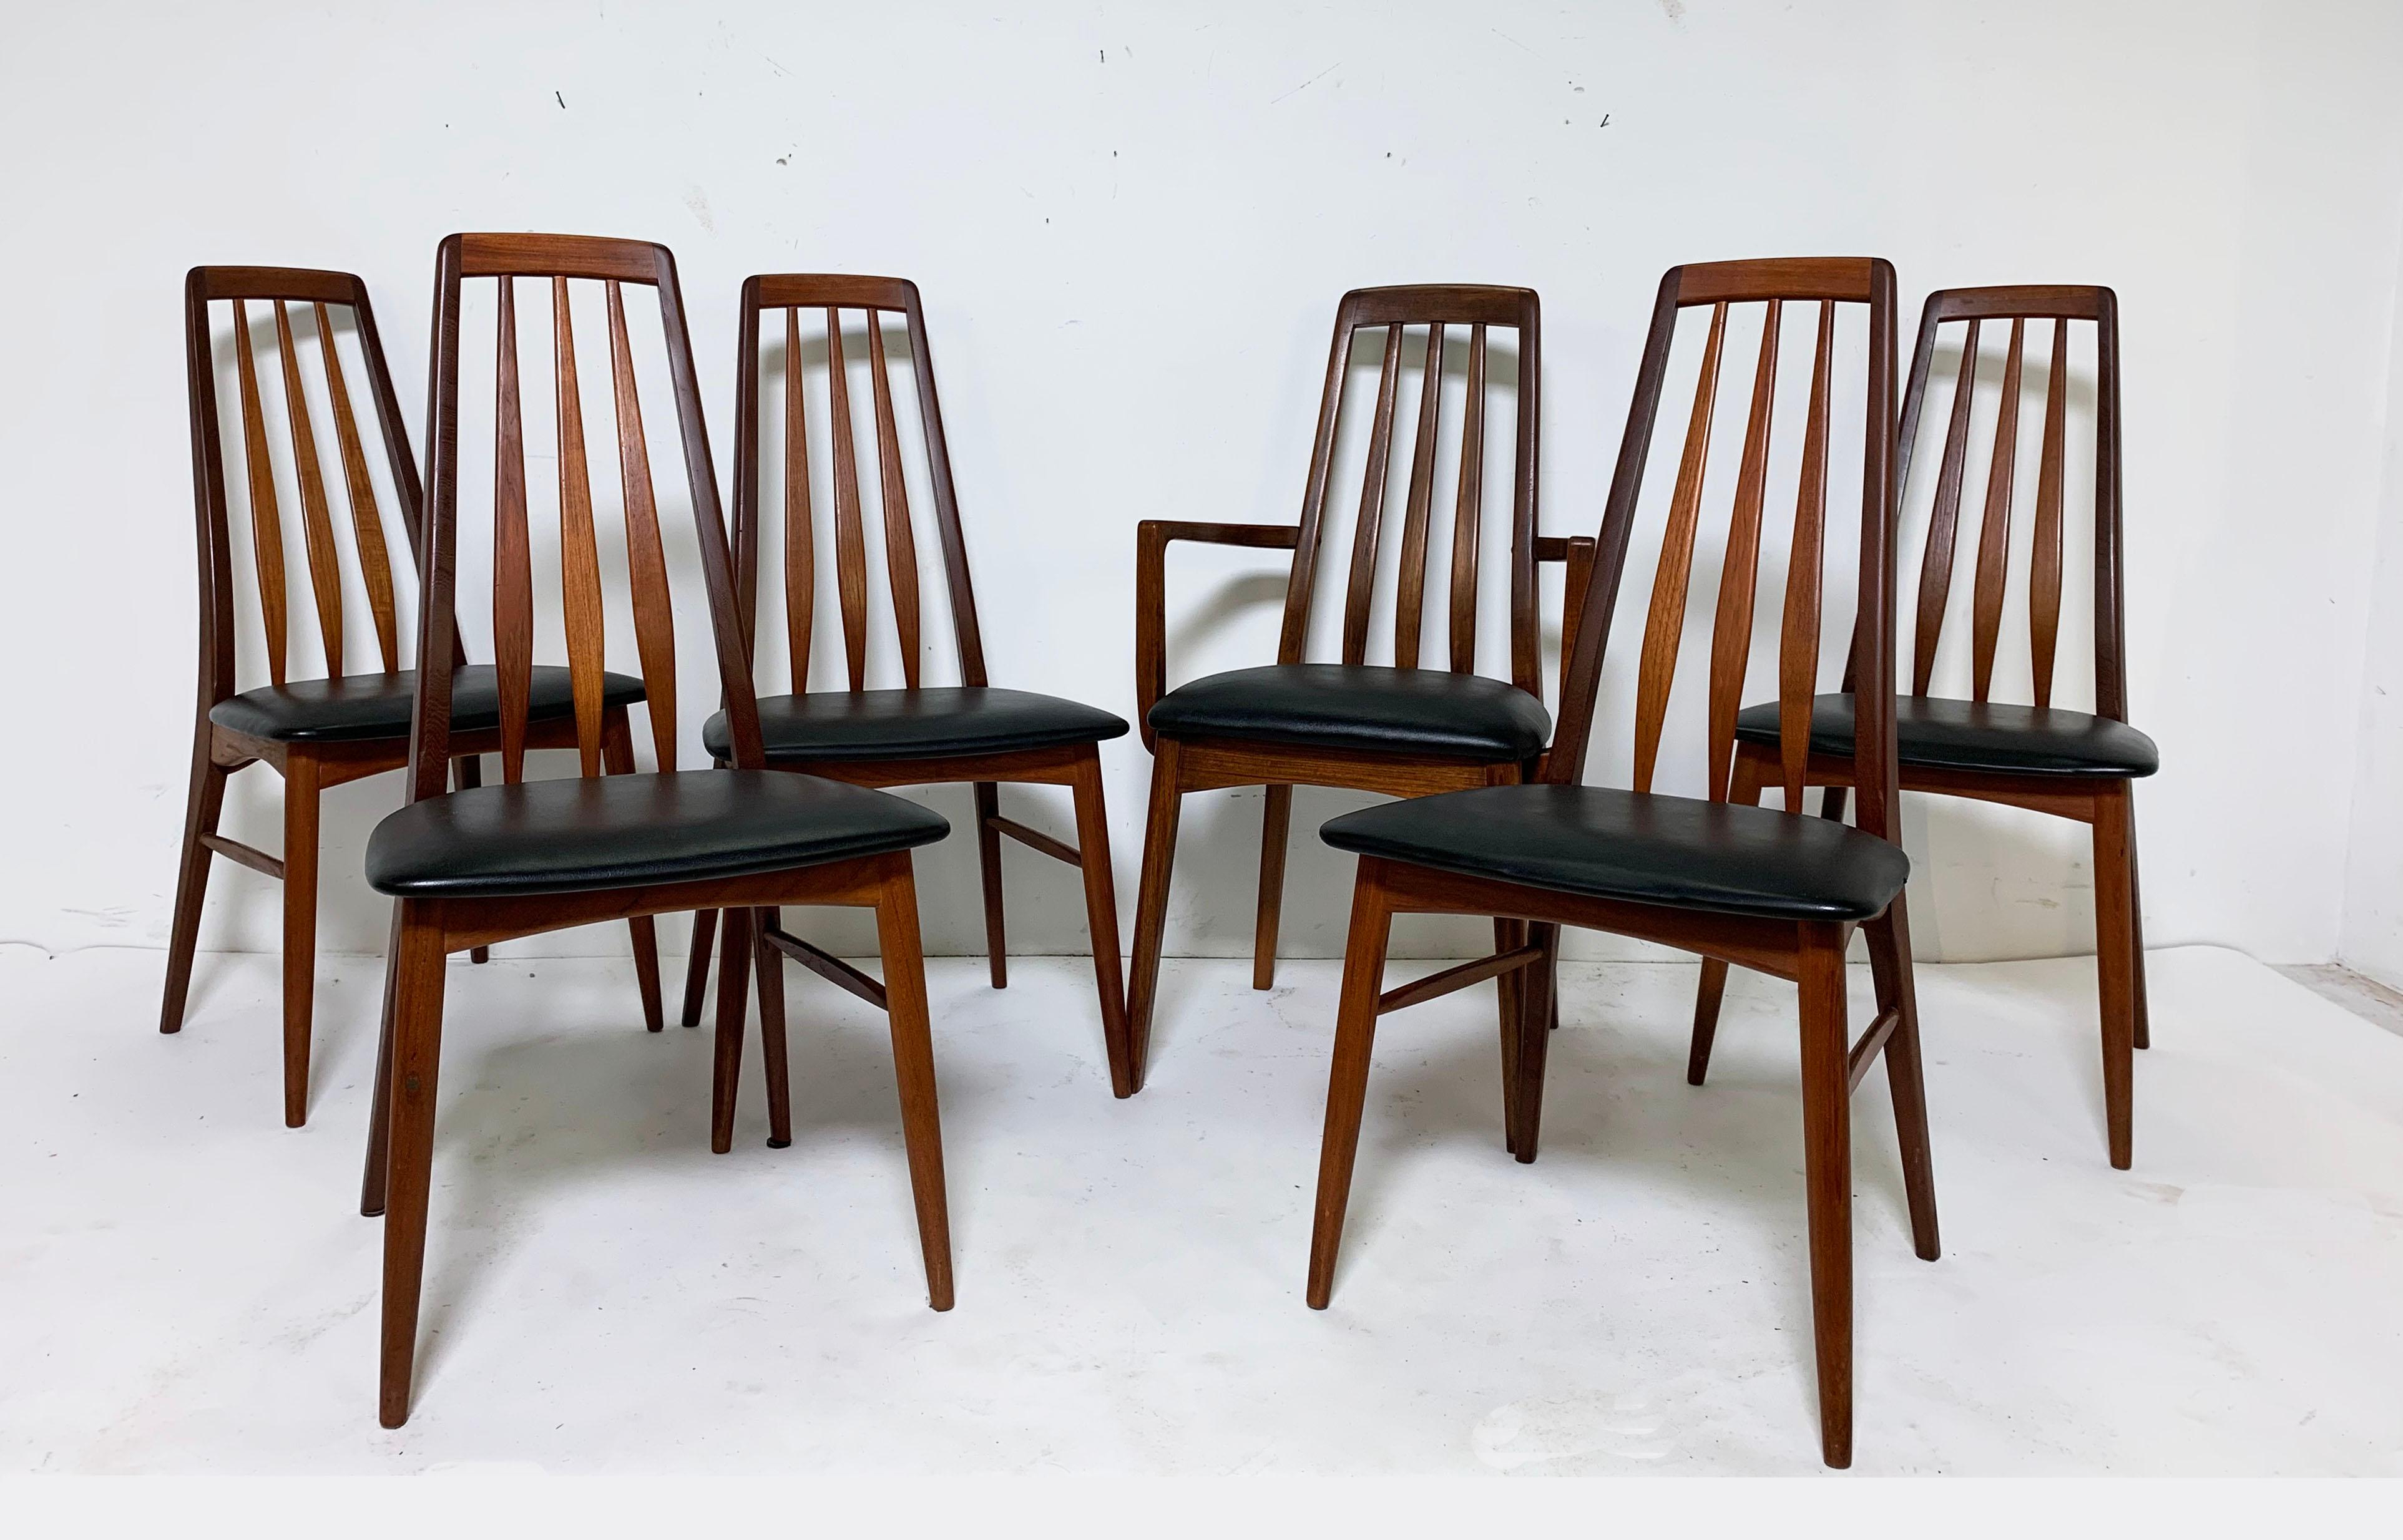 A set of six Danish high back dining chairs in teak. As found, the set consists of five 1960s vintage Niels Koefoed for Koefoeds Hornslet 